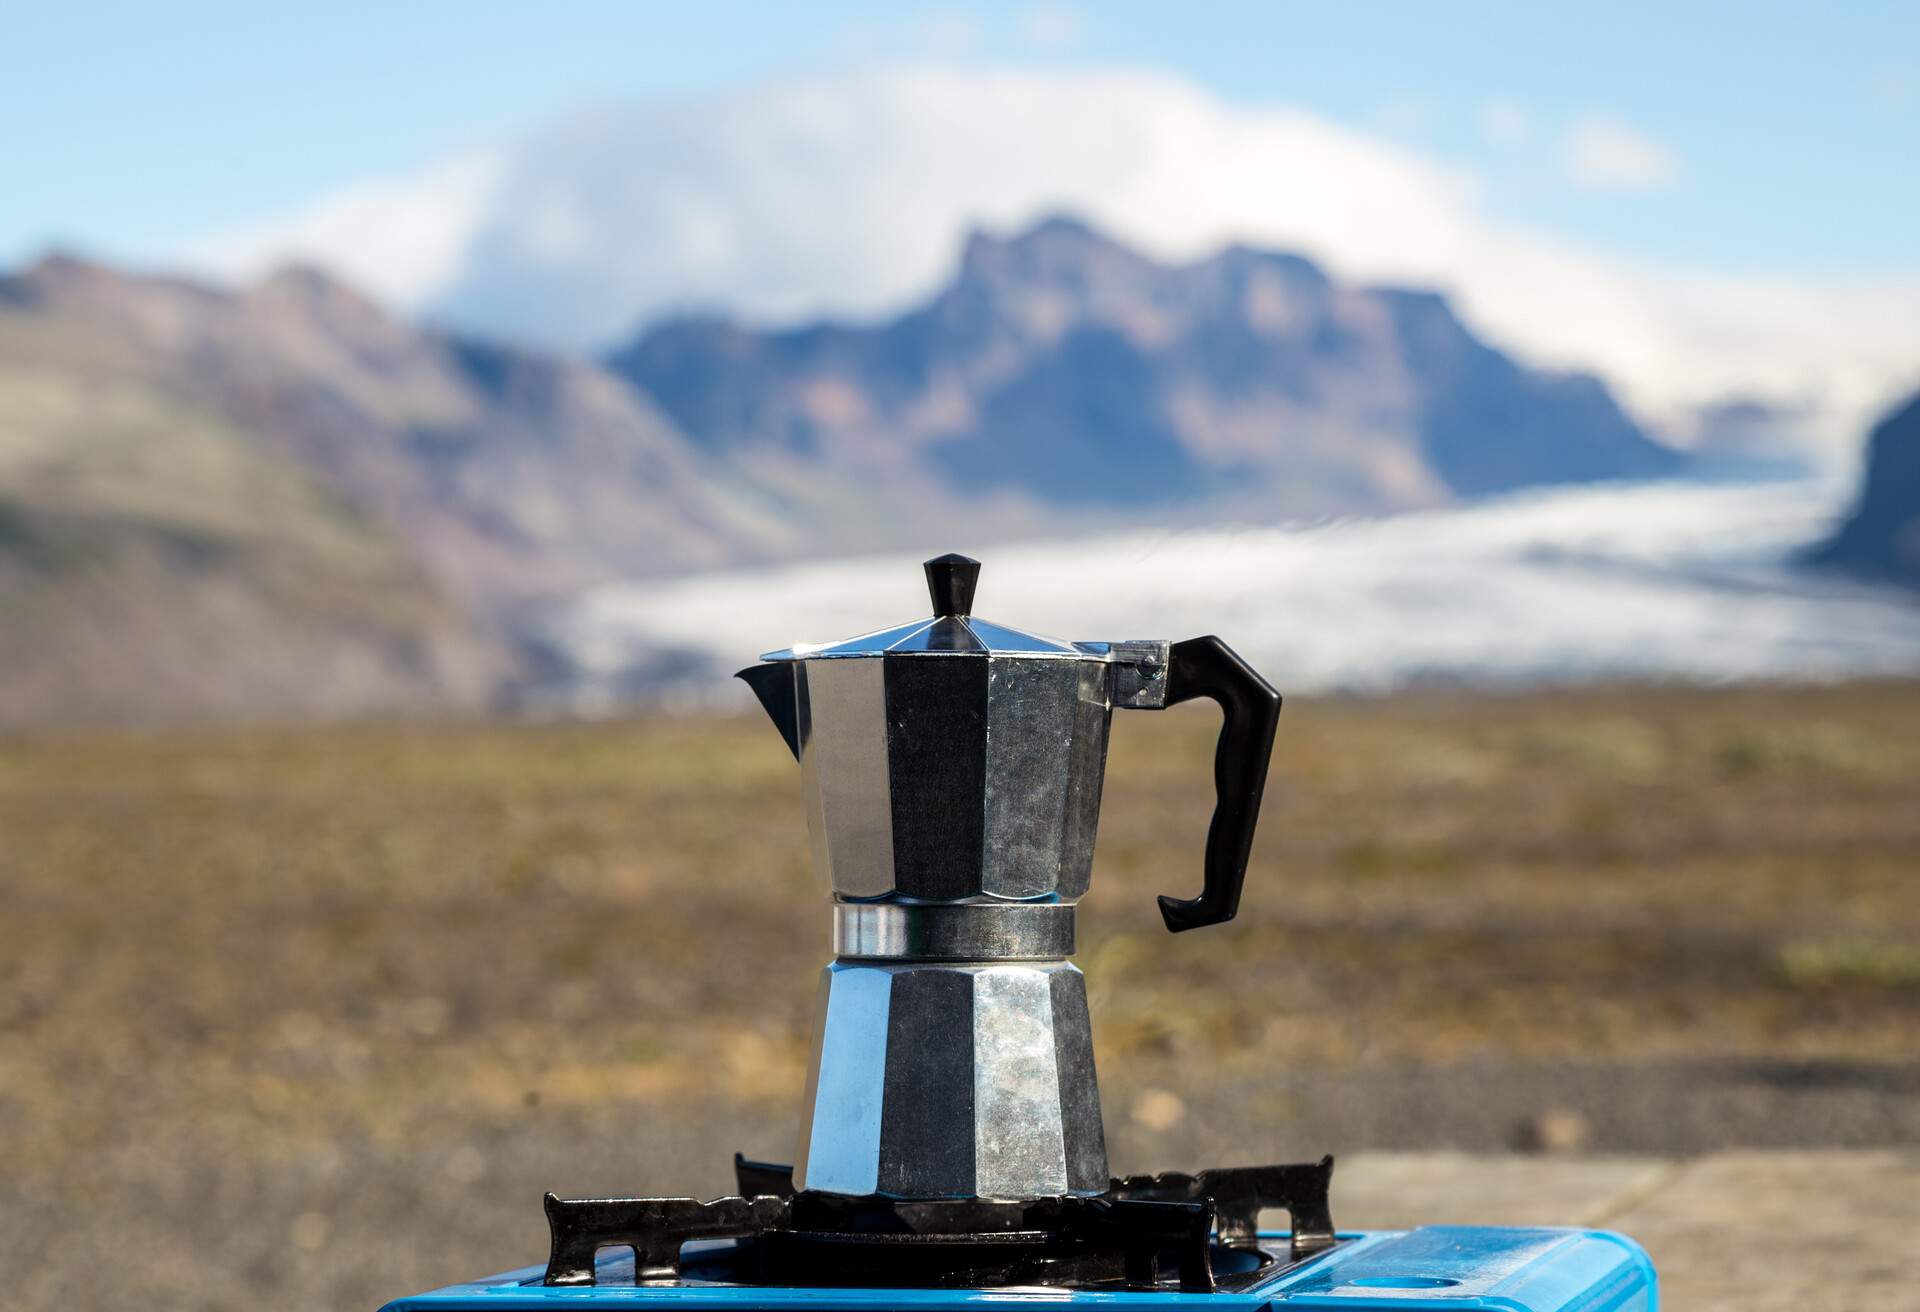 Moka pot on a gas stove at a picnic area, mountains in the background